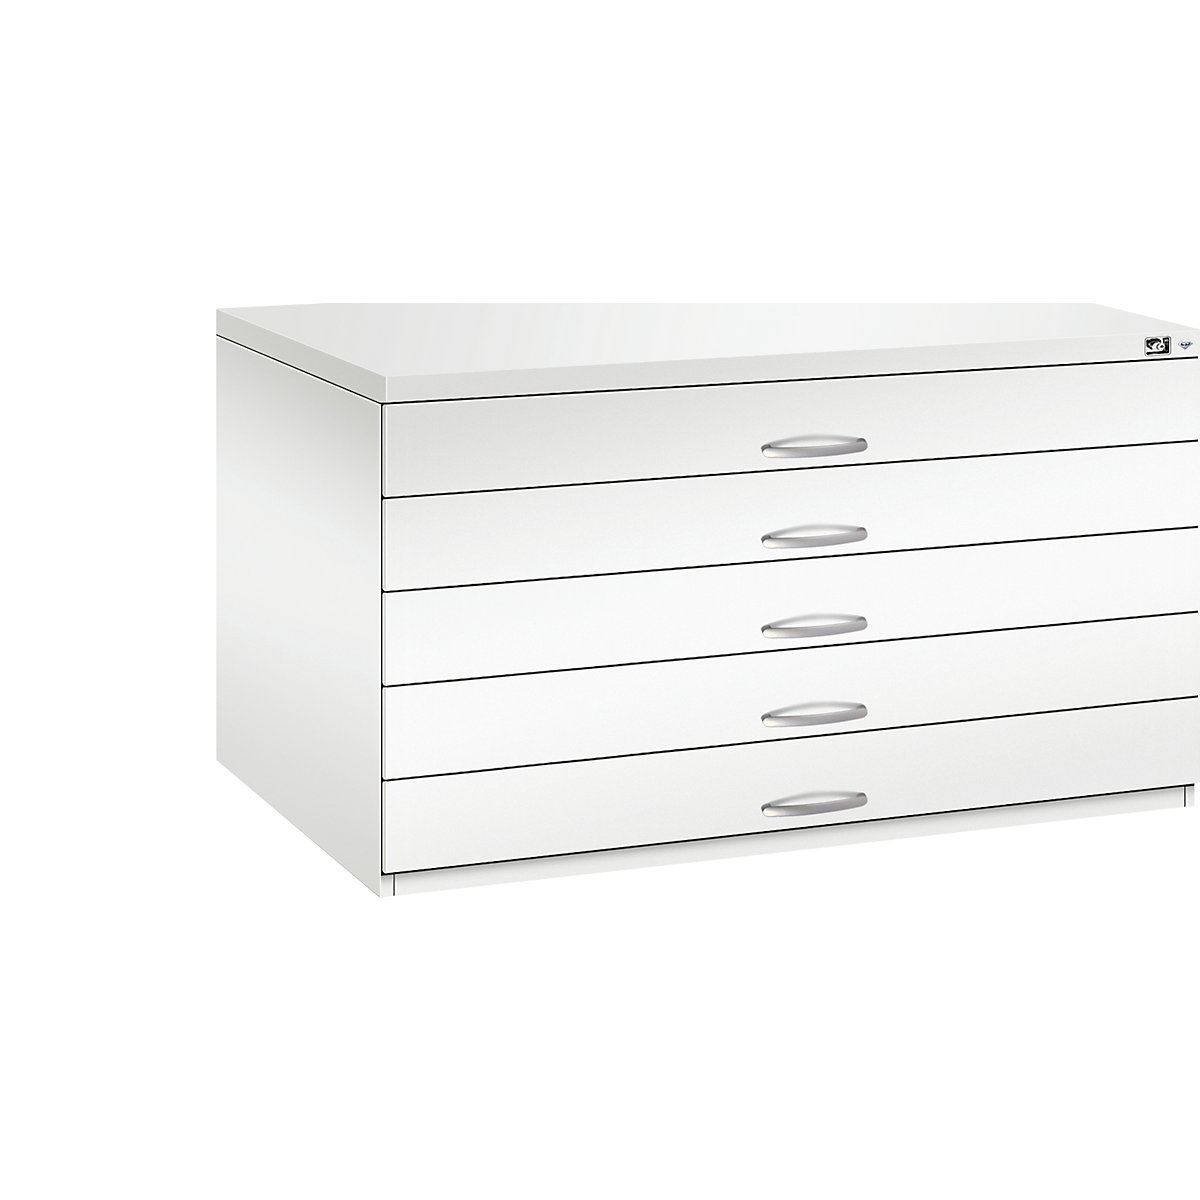 Drawing cabinet – C+P, A0, 5 drawers, height 760 mm, traffic white-18